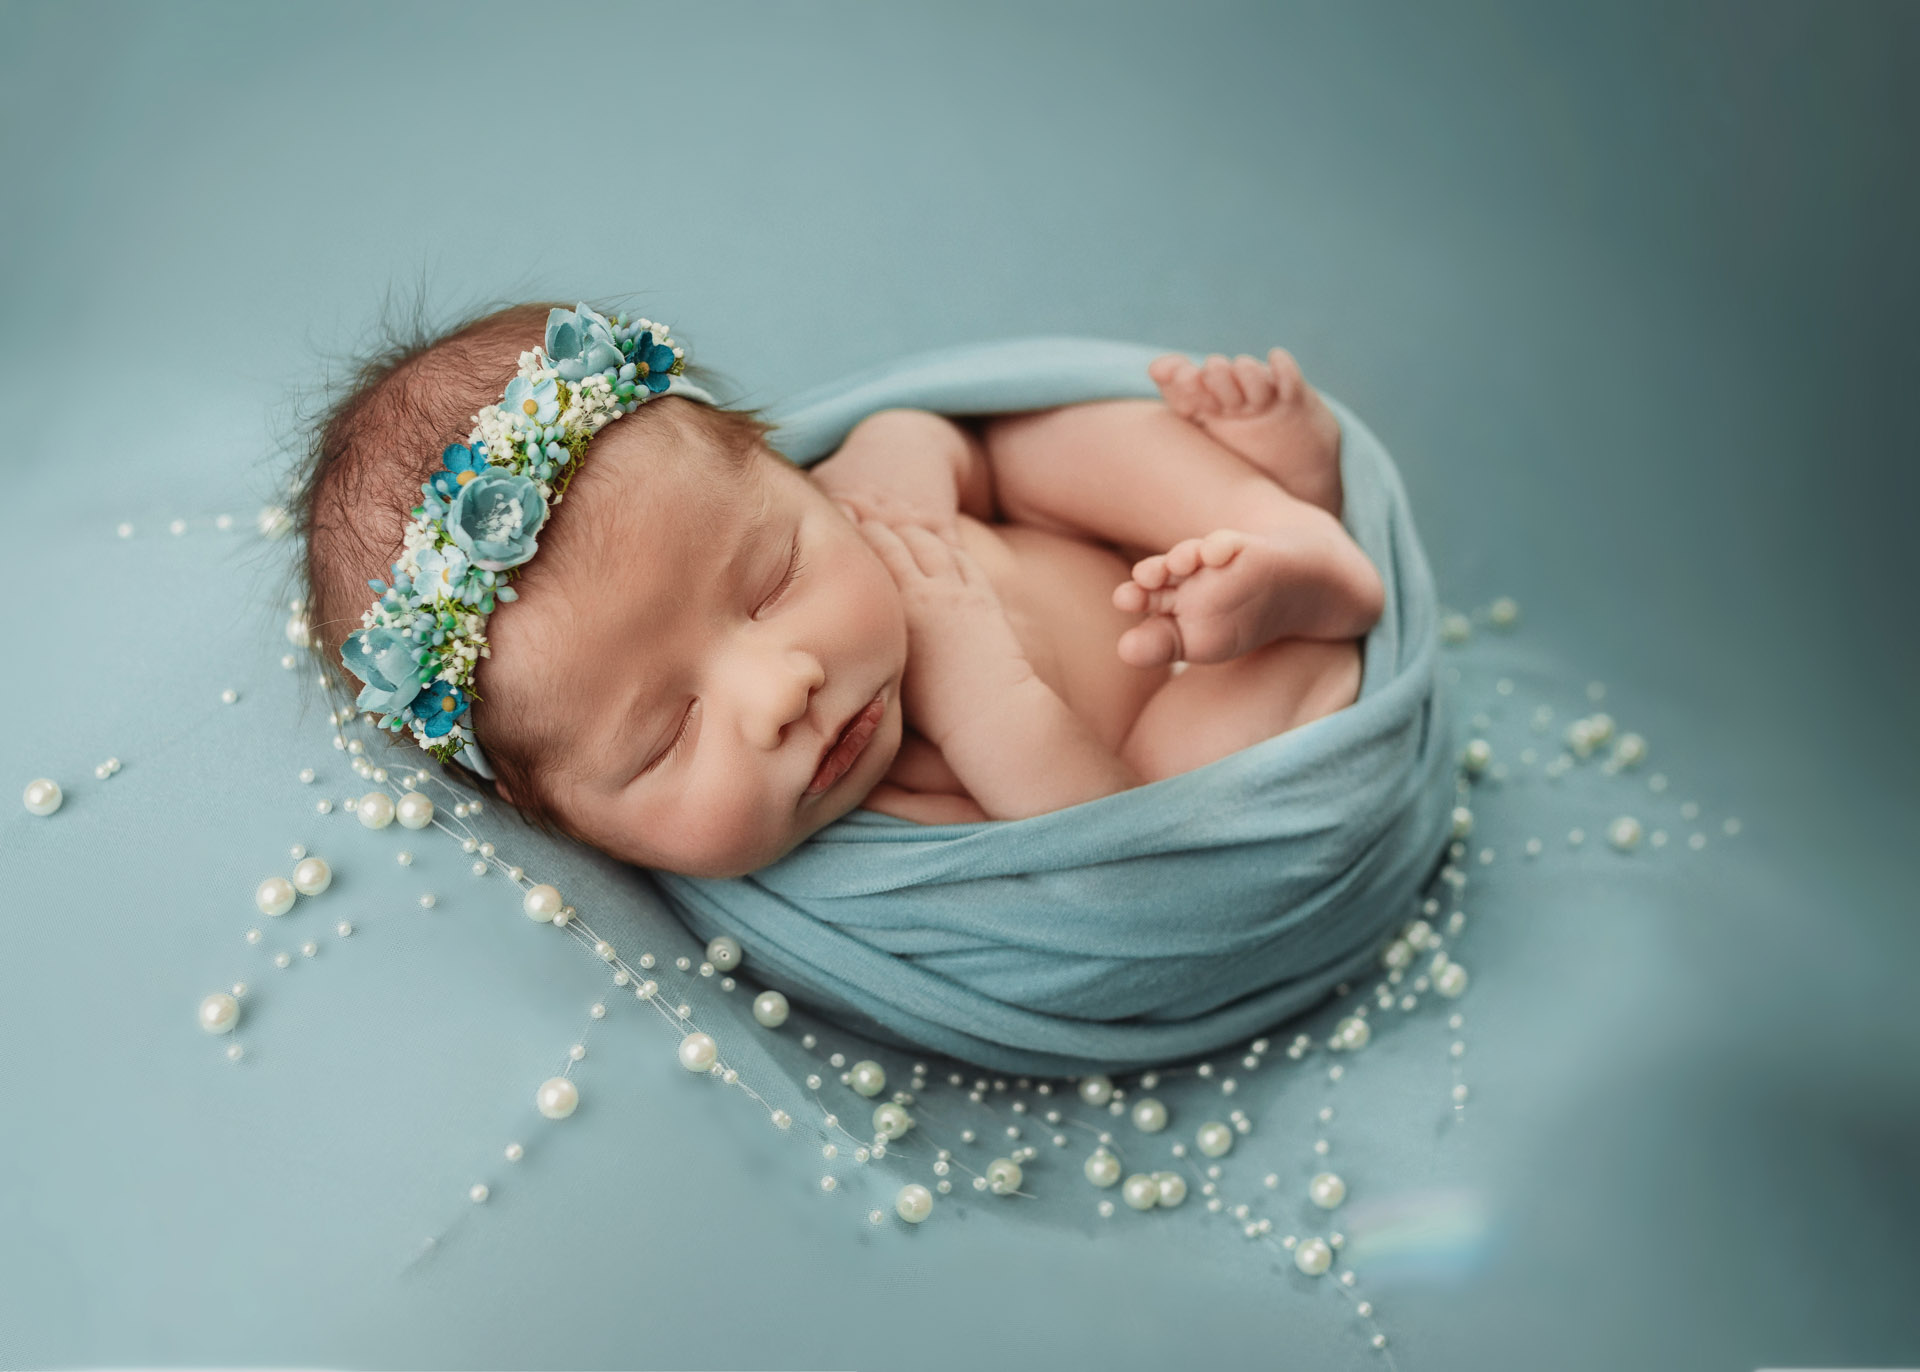 newborn girl on light teal with floral crown and pearls newborn photographer minneapolis minnesota